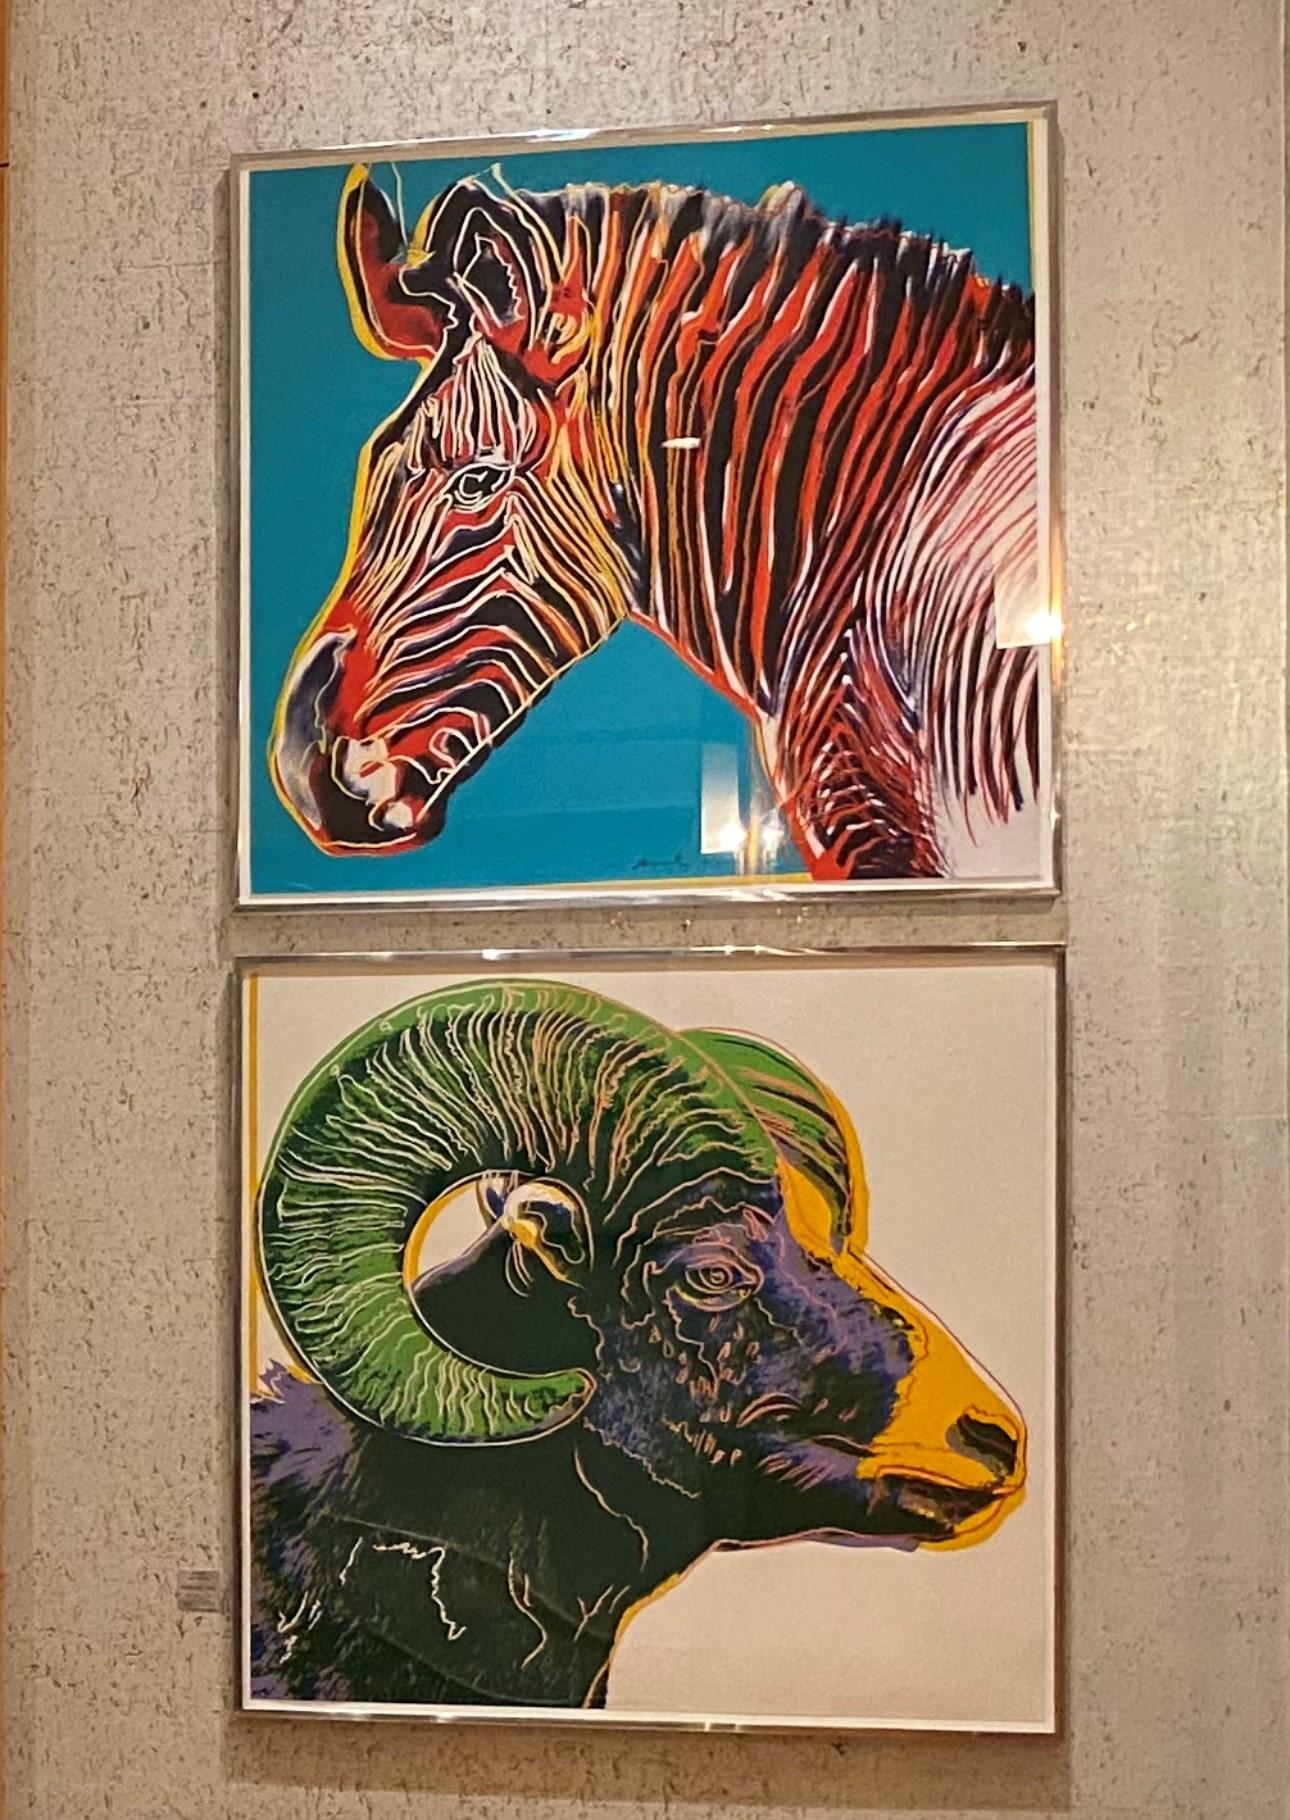 Grevy's Zebra, from Endangered Species F&S II.300 - Print by Andy Warhol